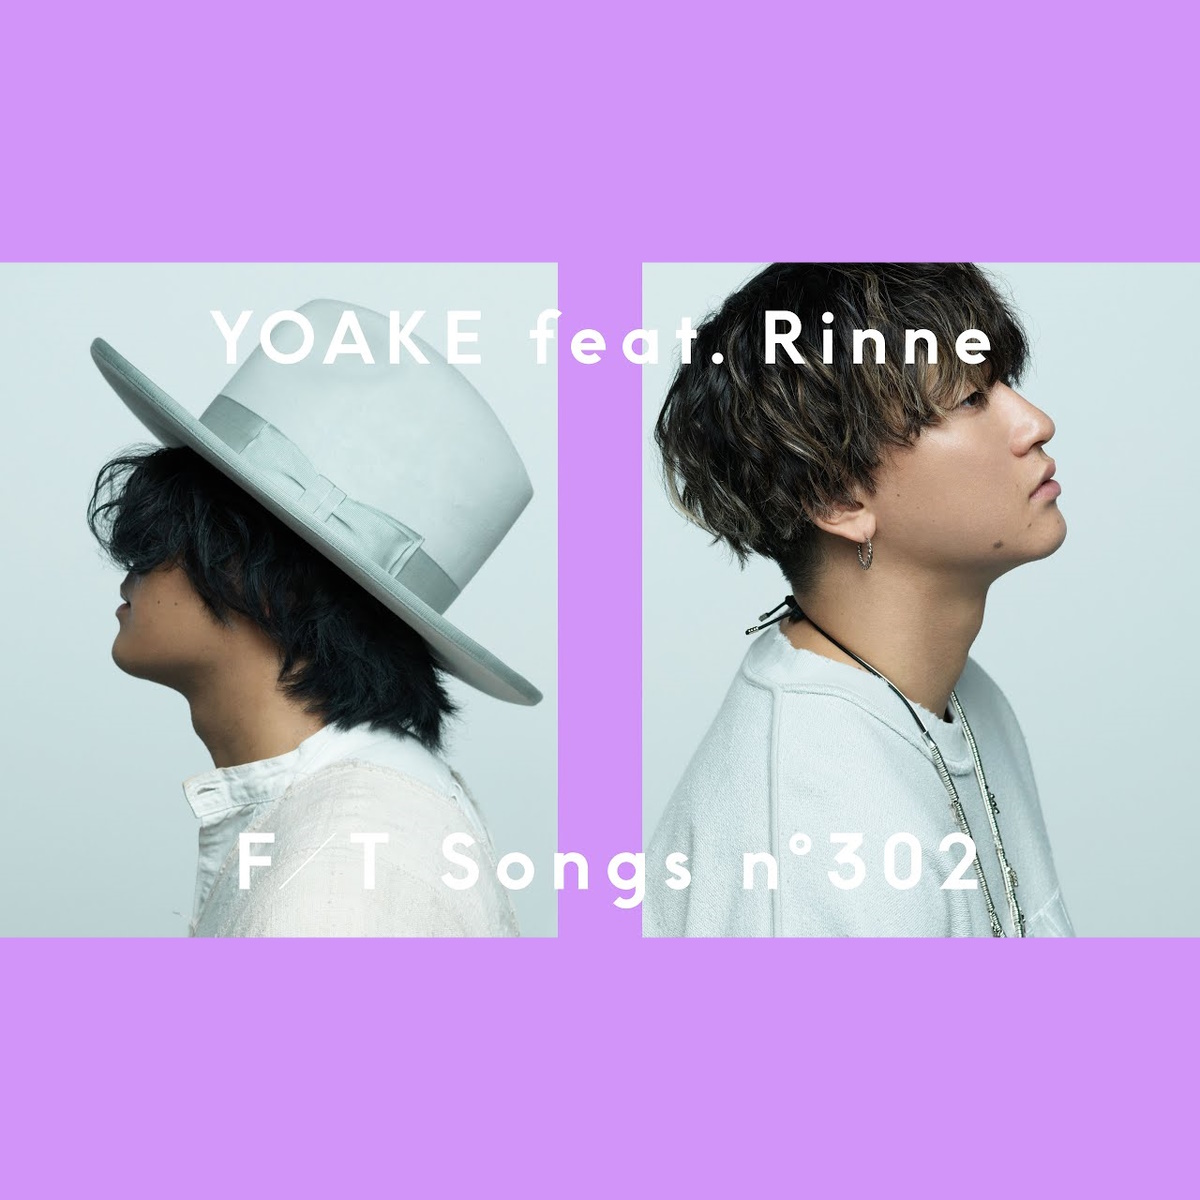 Cover art for『YOAKE - Nee feat. Rinne』from the release『Nee feat. Rinne』